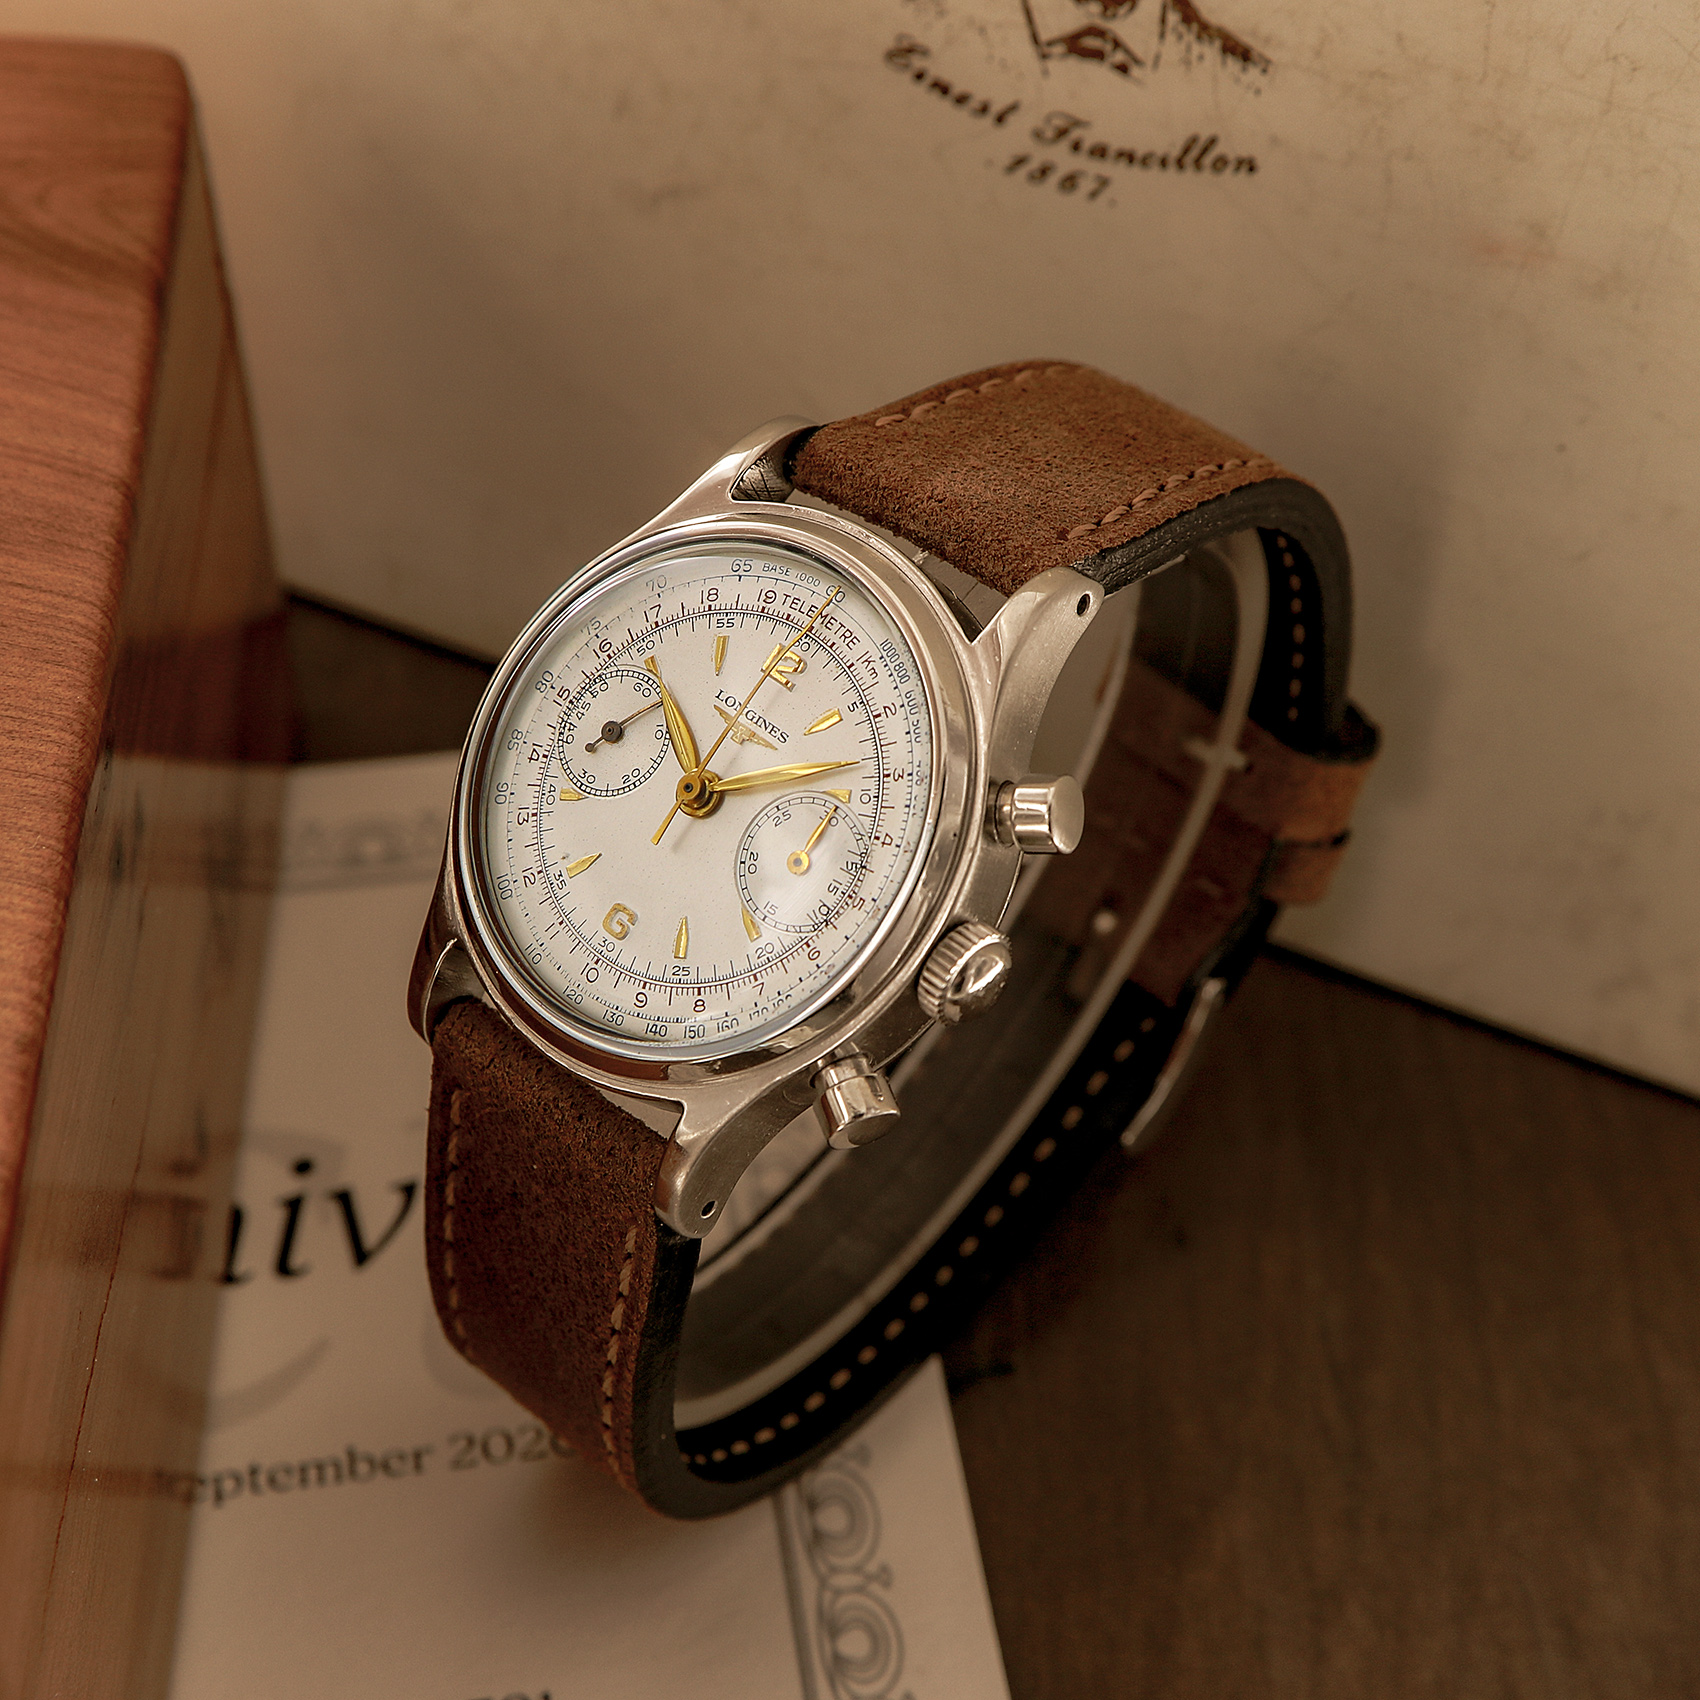 Longines Vintage Chronograph Stainless Steel, ref.4813, caliber 13ZN.